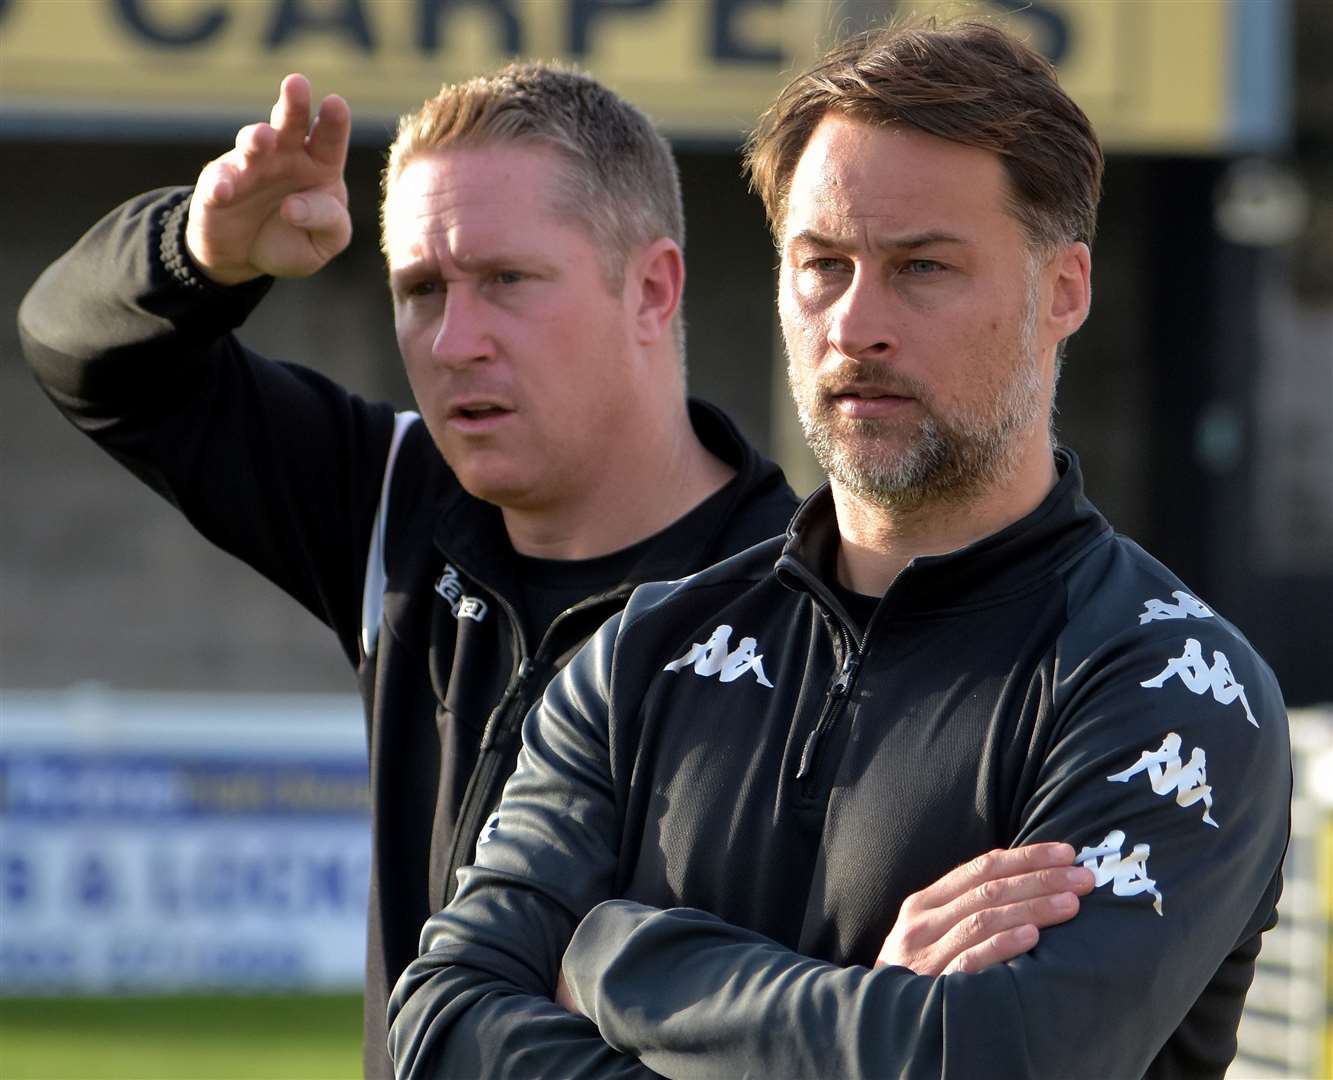 Roland Edge, left, and Micheal Everitt have been relieved of their duties at Folkestone. Picture: Randolph File